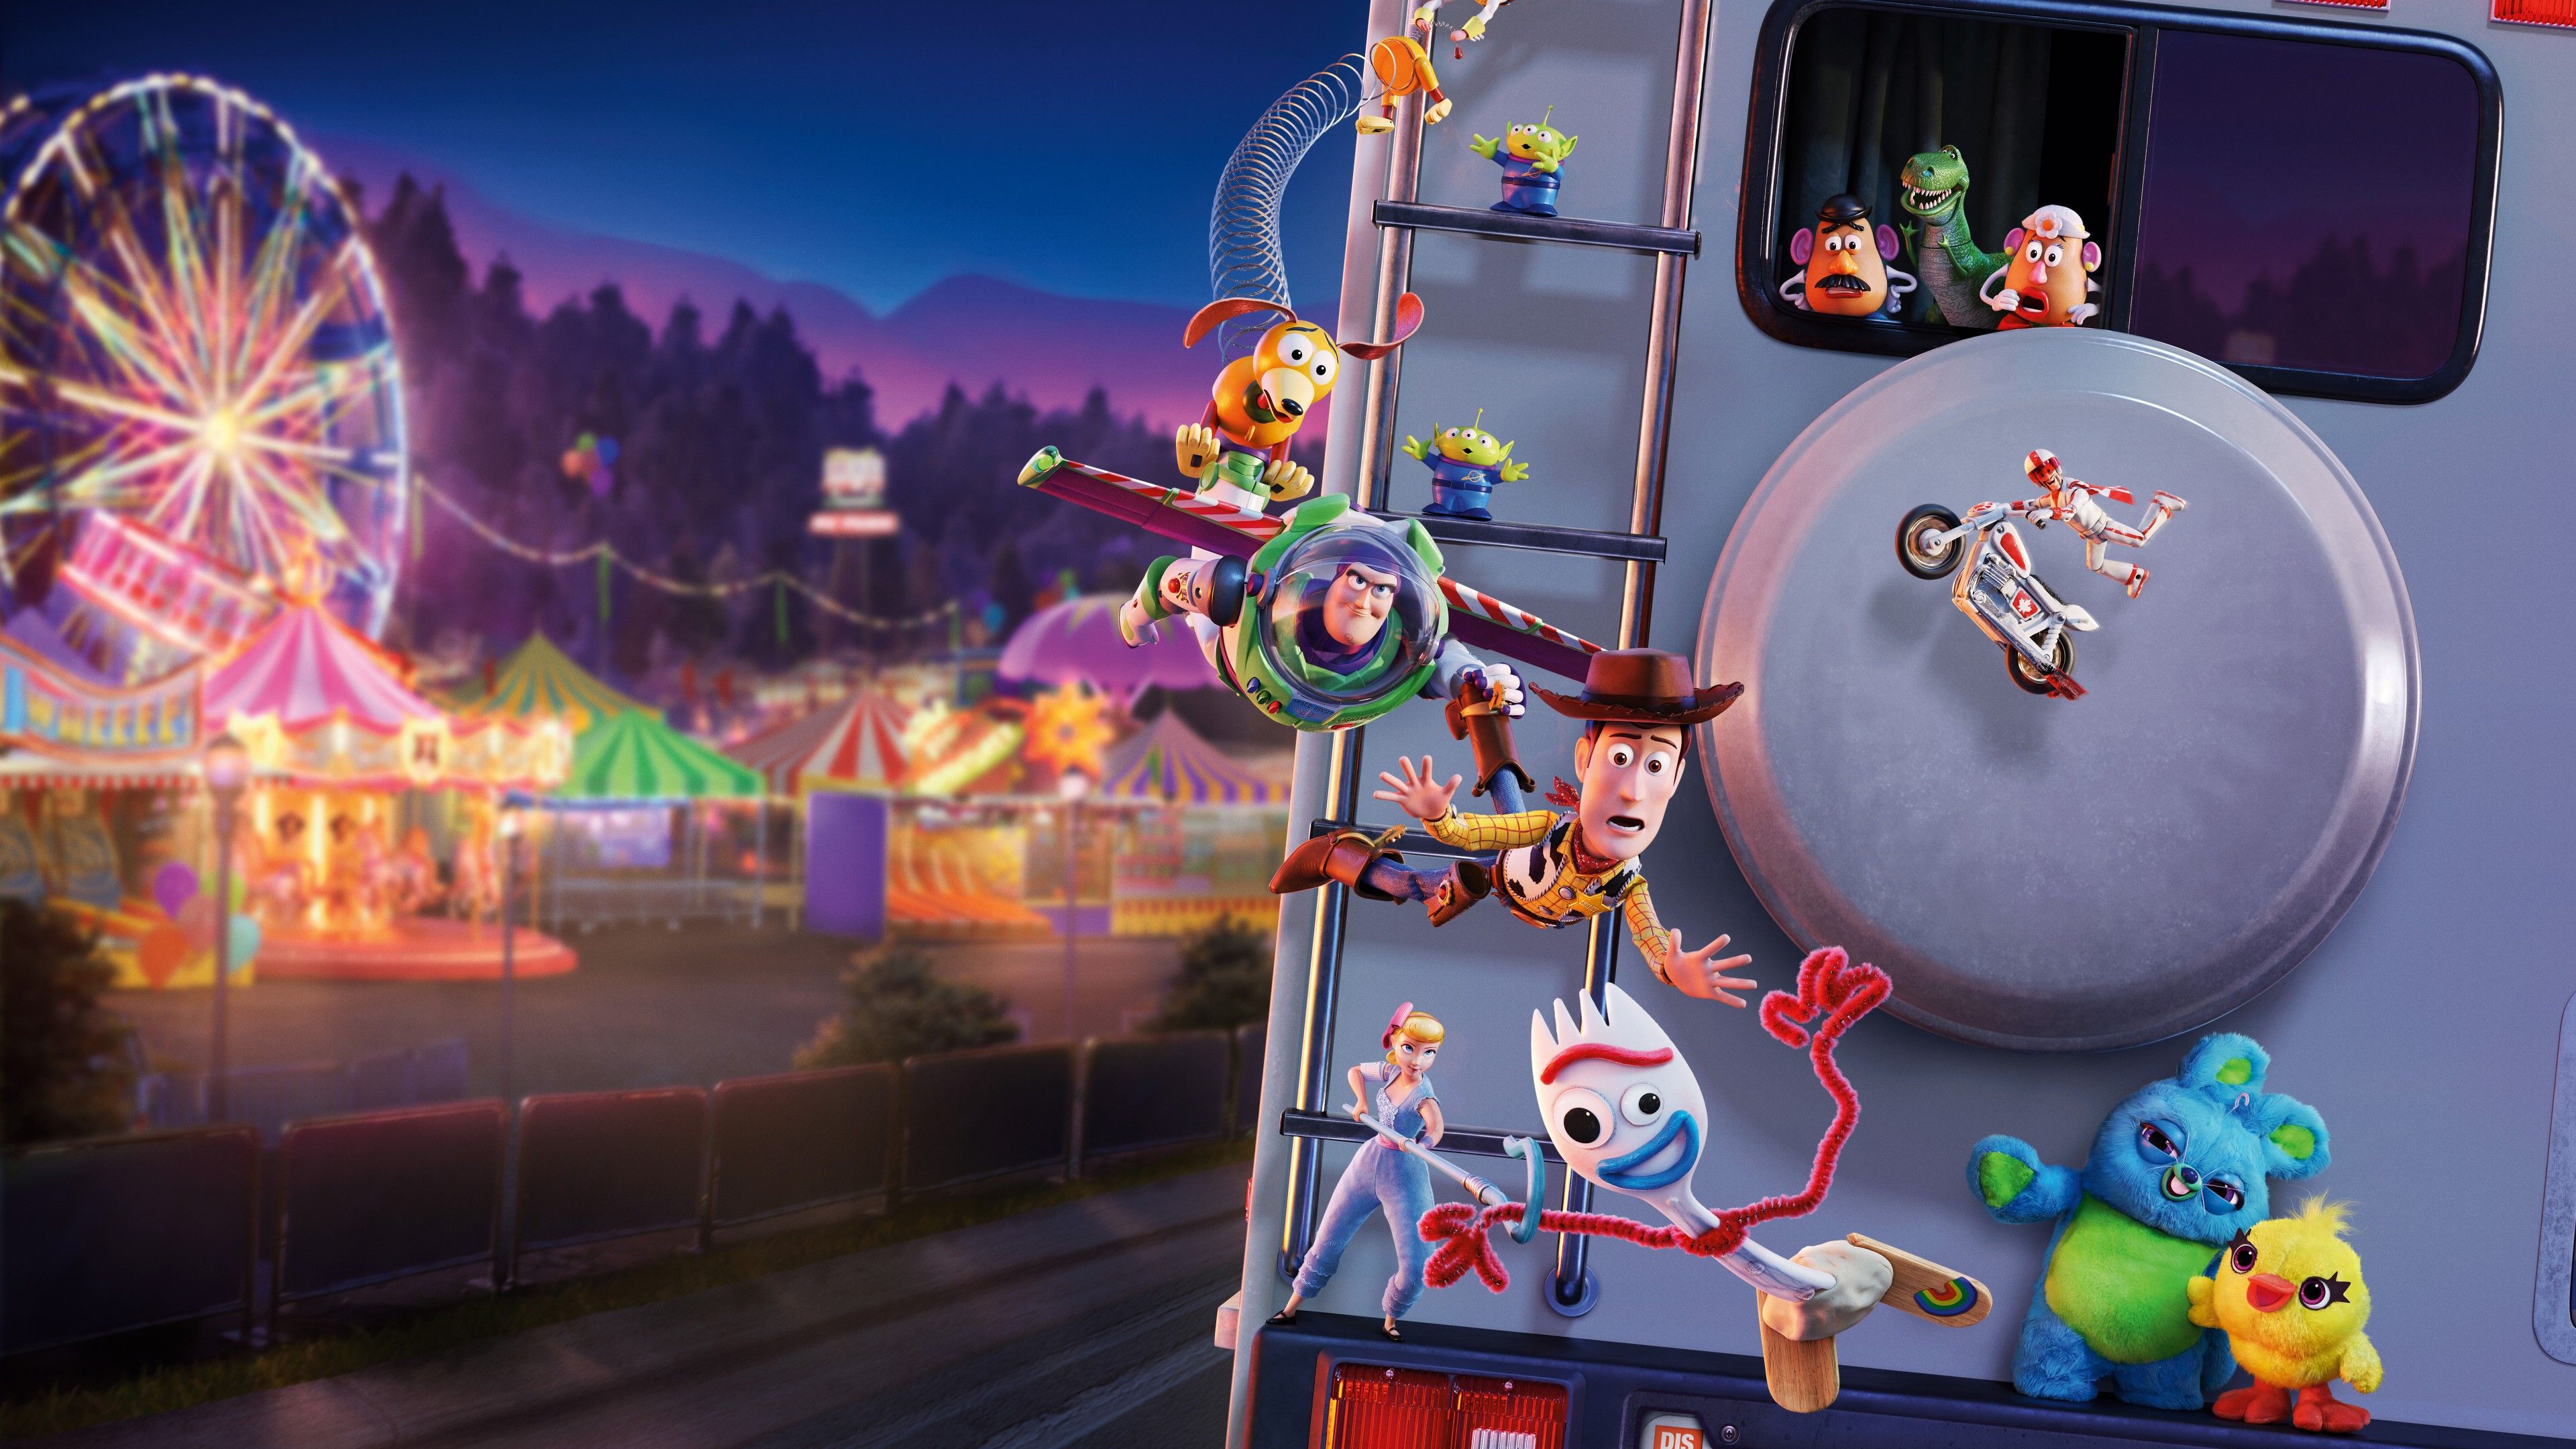 Wallpaper Toy Story Animation, 5K, Movies,. Wallpaper for iPhone, Android, Mobile and Desktop